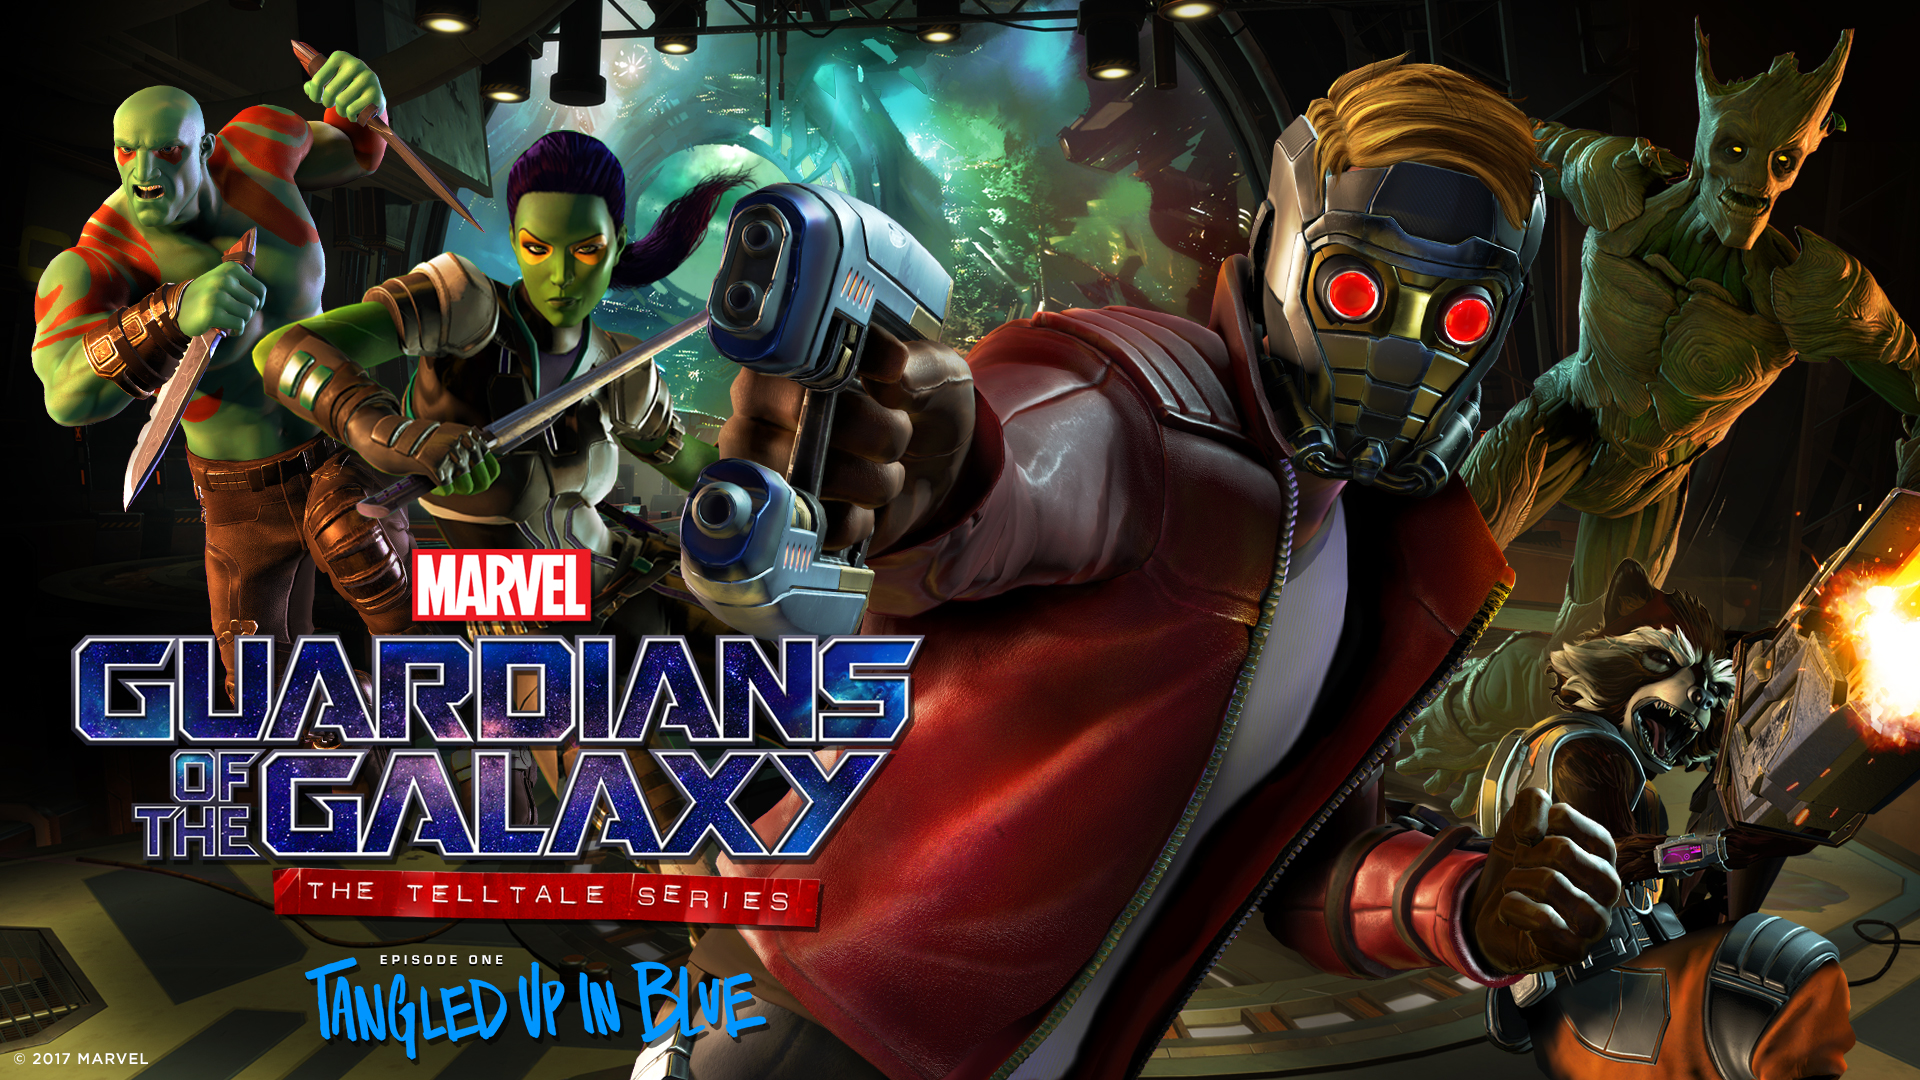 Marvel’s “Guardians of the Galaxy: The Telltale Series” Now Available from Telltale Games and Marvel Entertainment